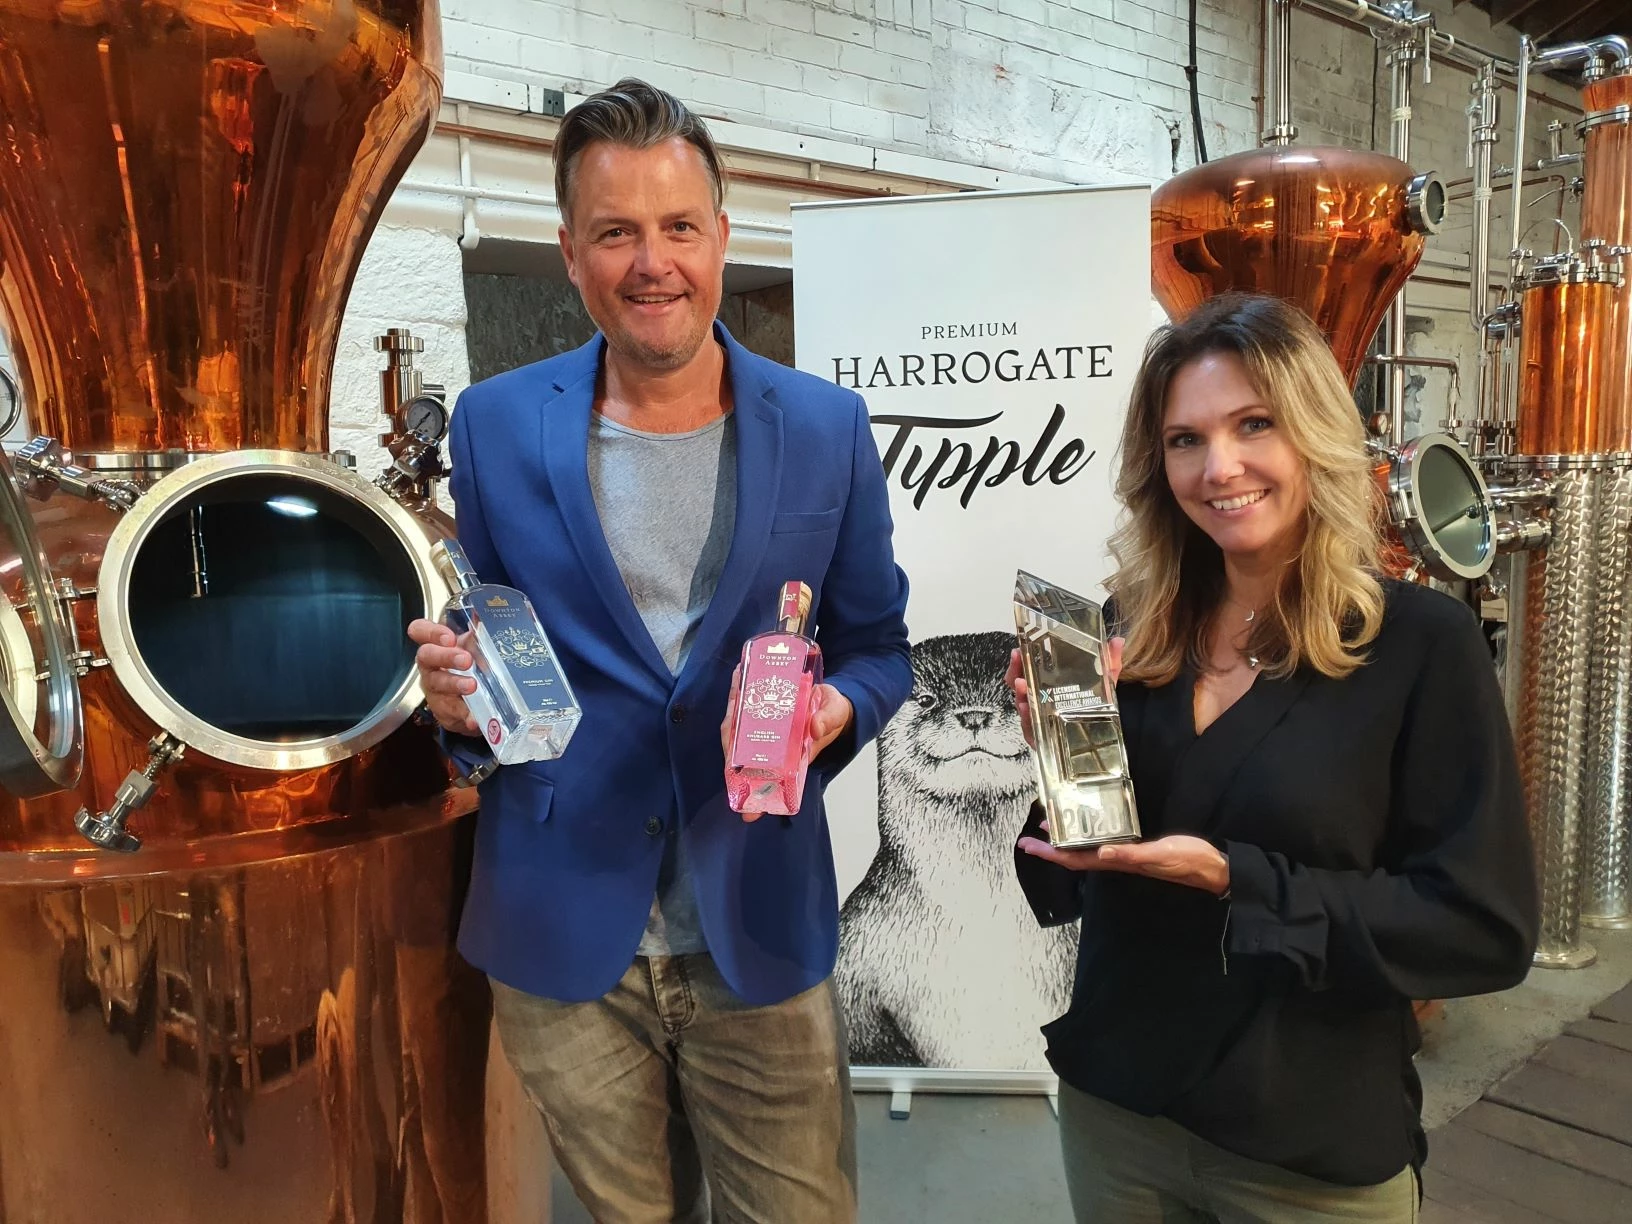  Co-founders of Harrogate Tipple, husband and wife Steven and Sally Green, with the Licensing International Excellence Award 2020 for Best Newcomer